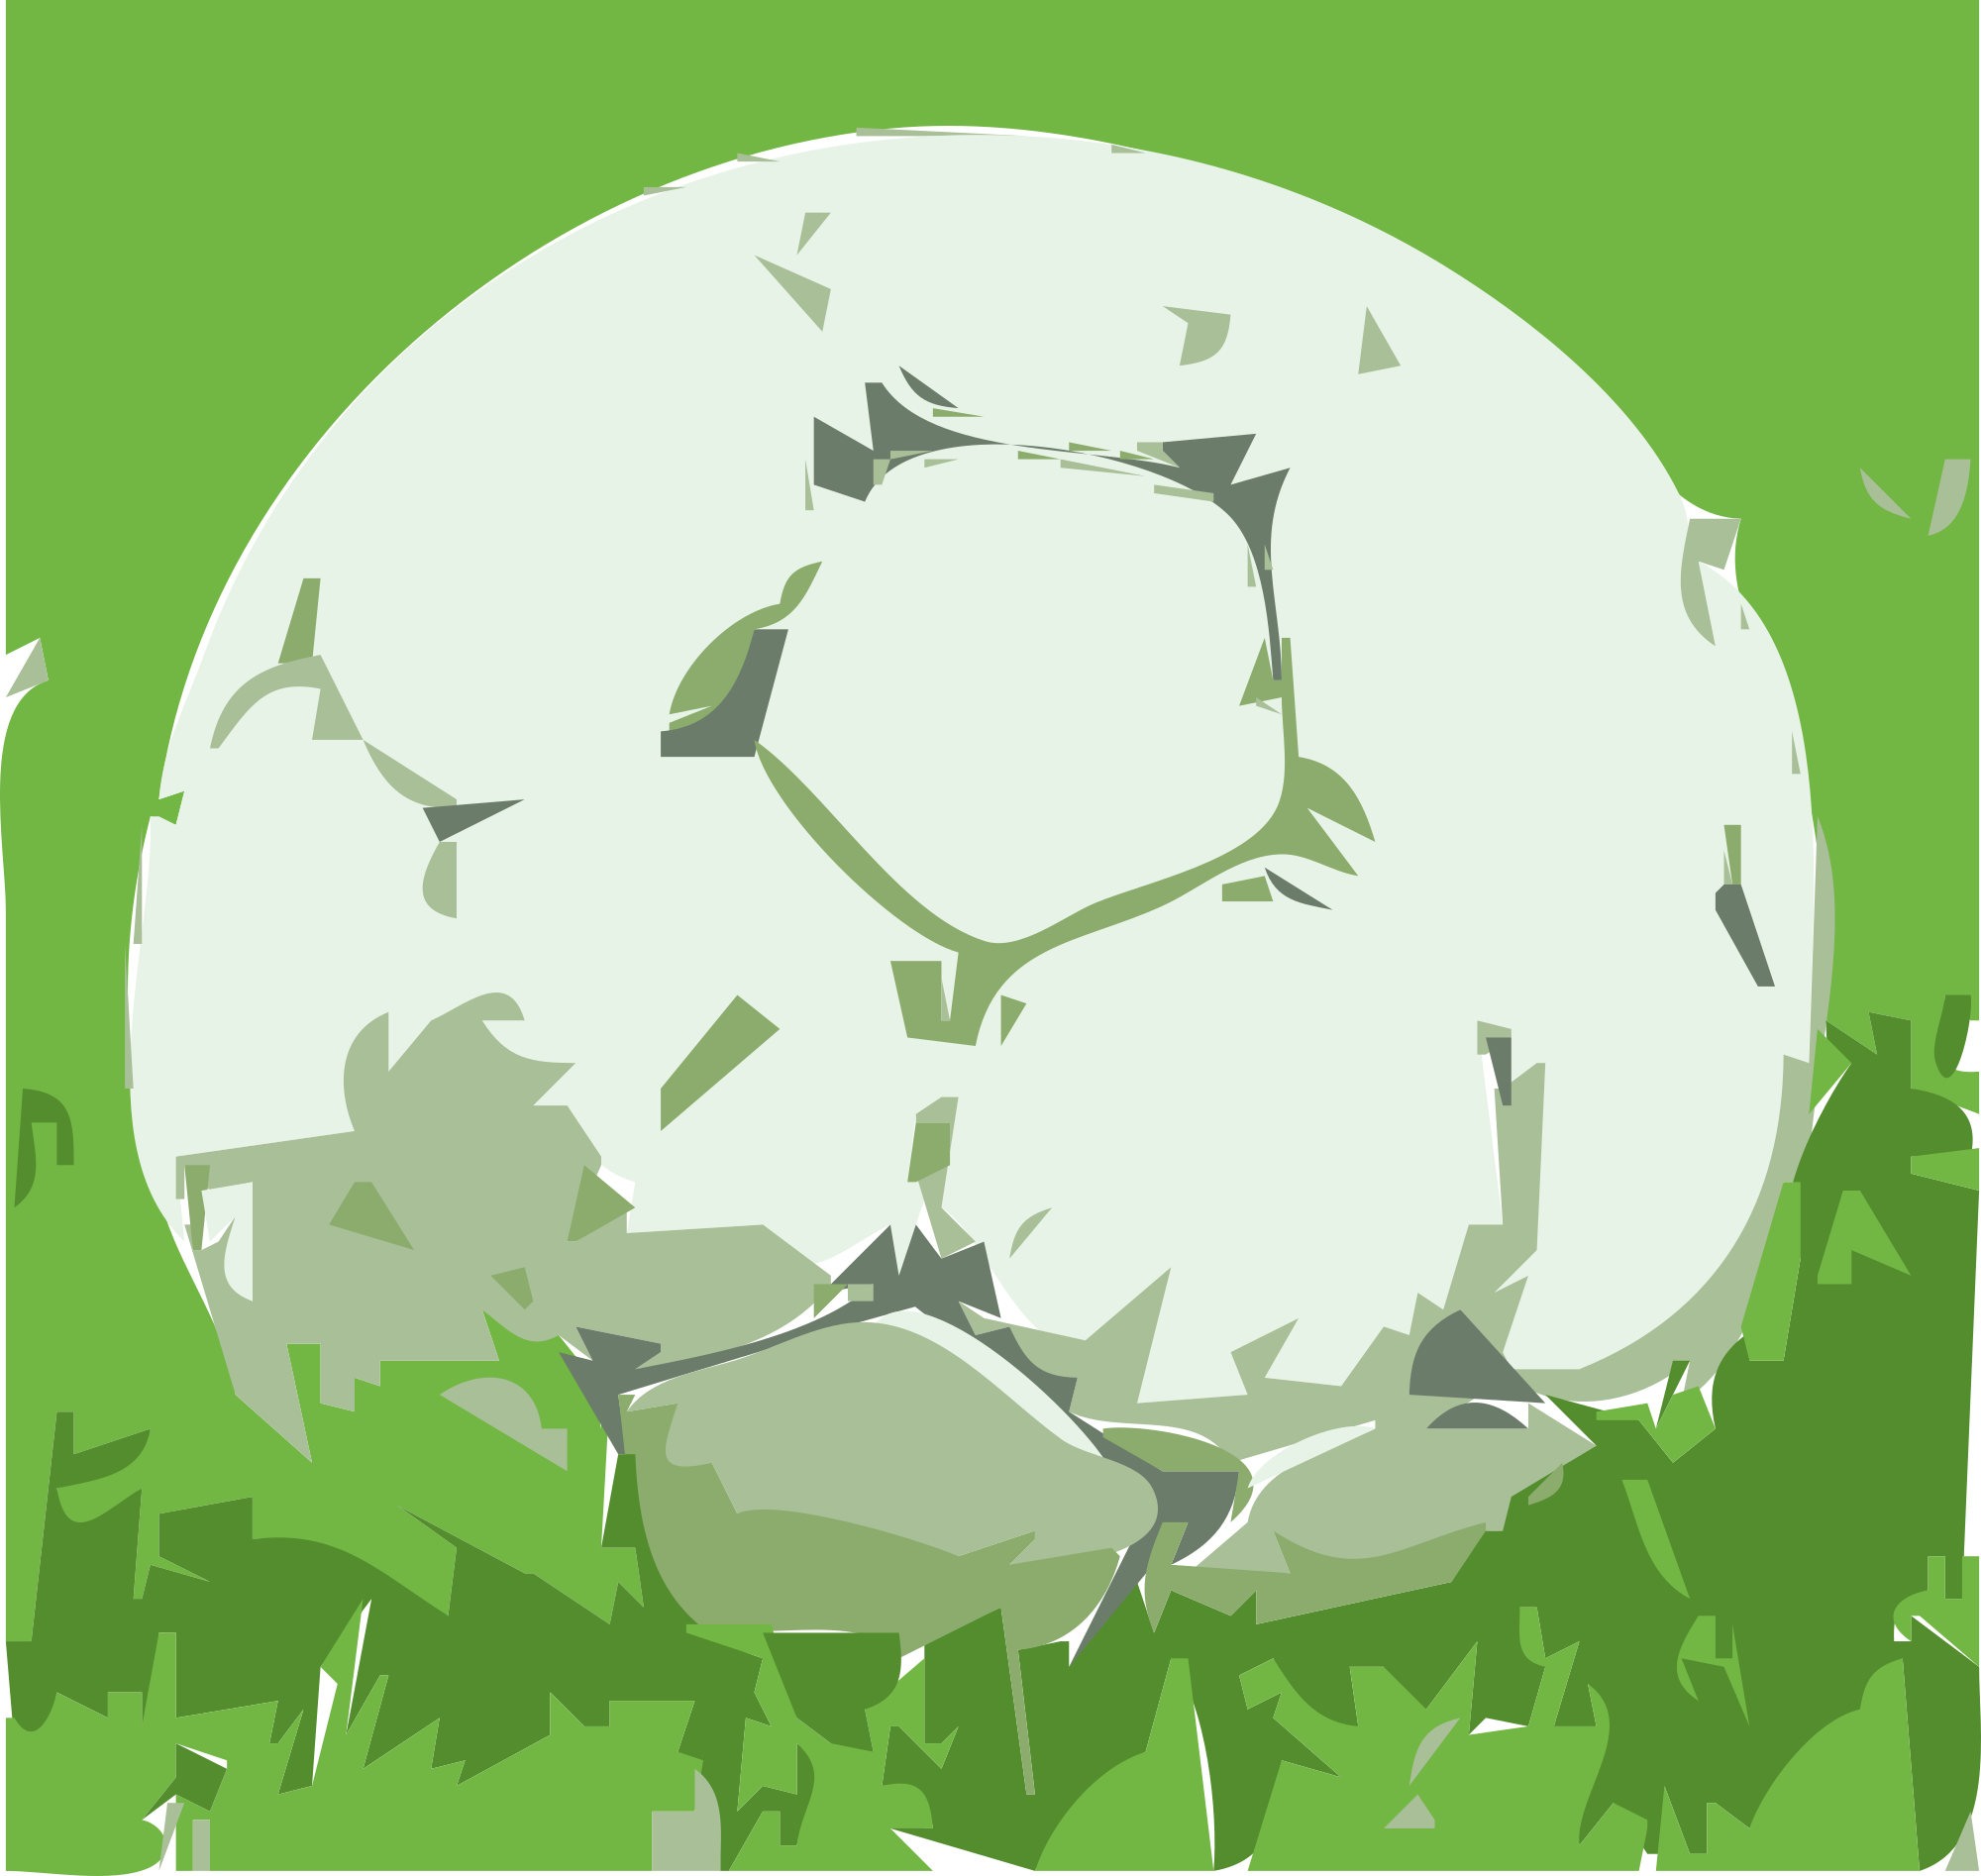 Free soccer ball on grass clipart clipart and vector image